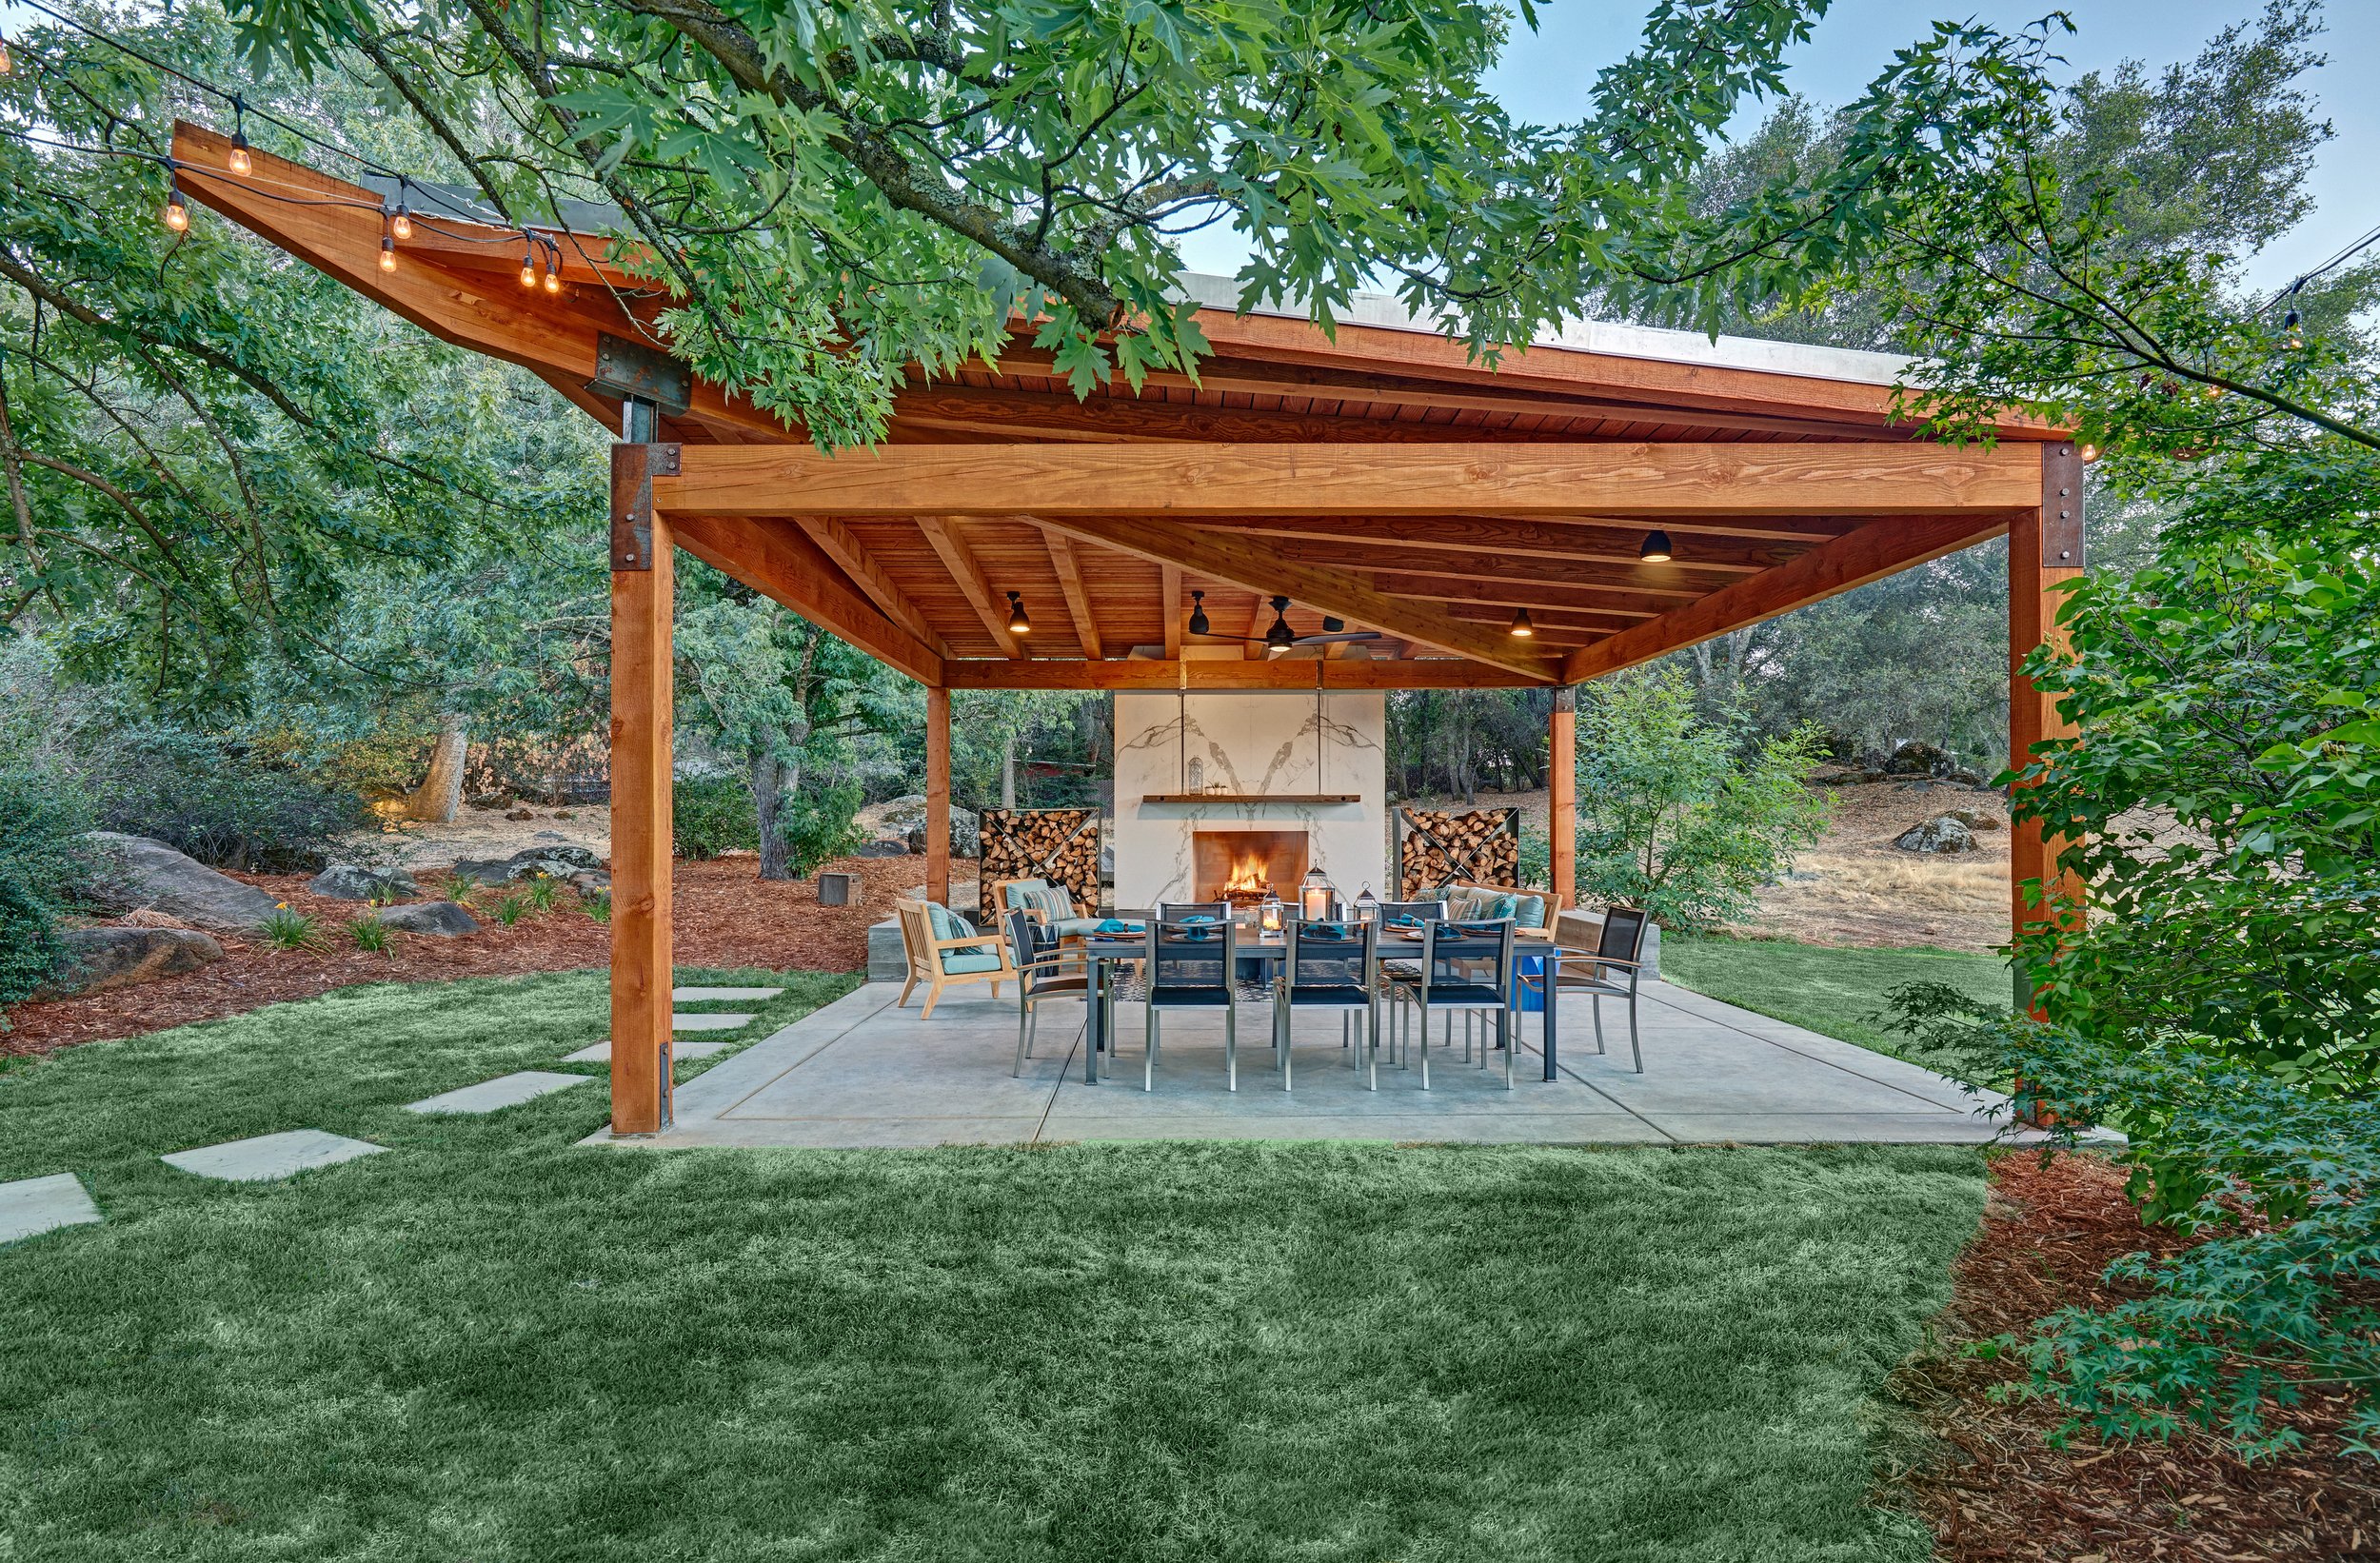 Creating An Outdoor Oasis With Staying (And Soothing) Power